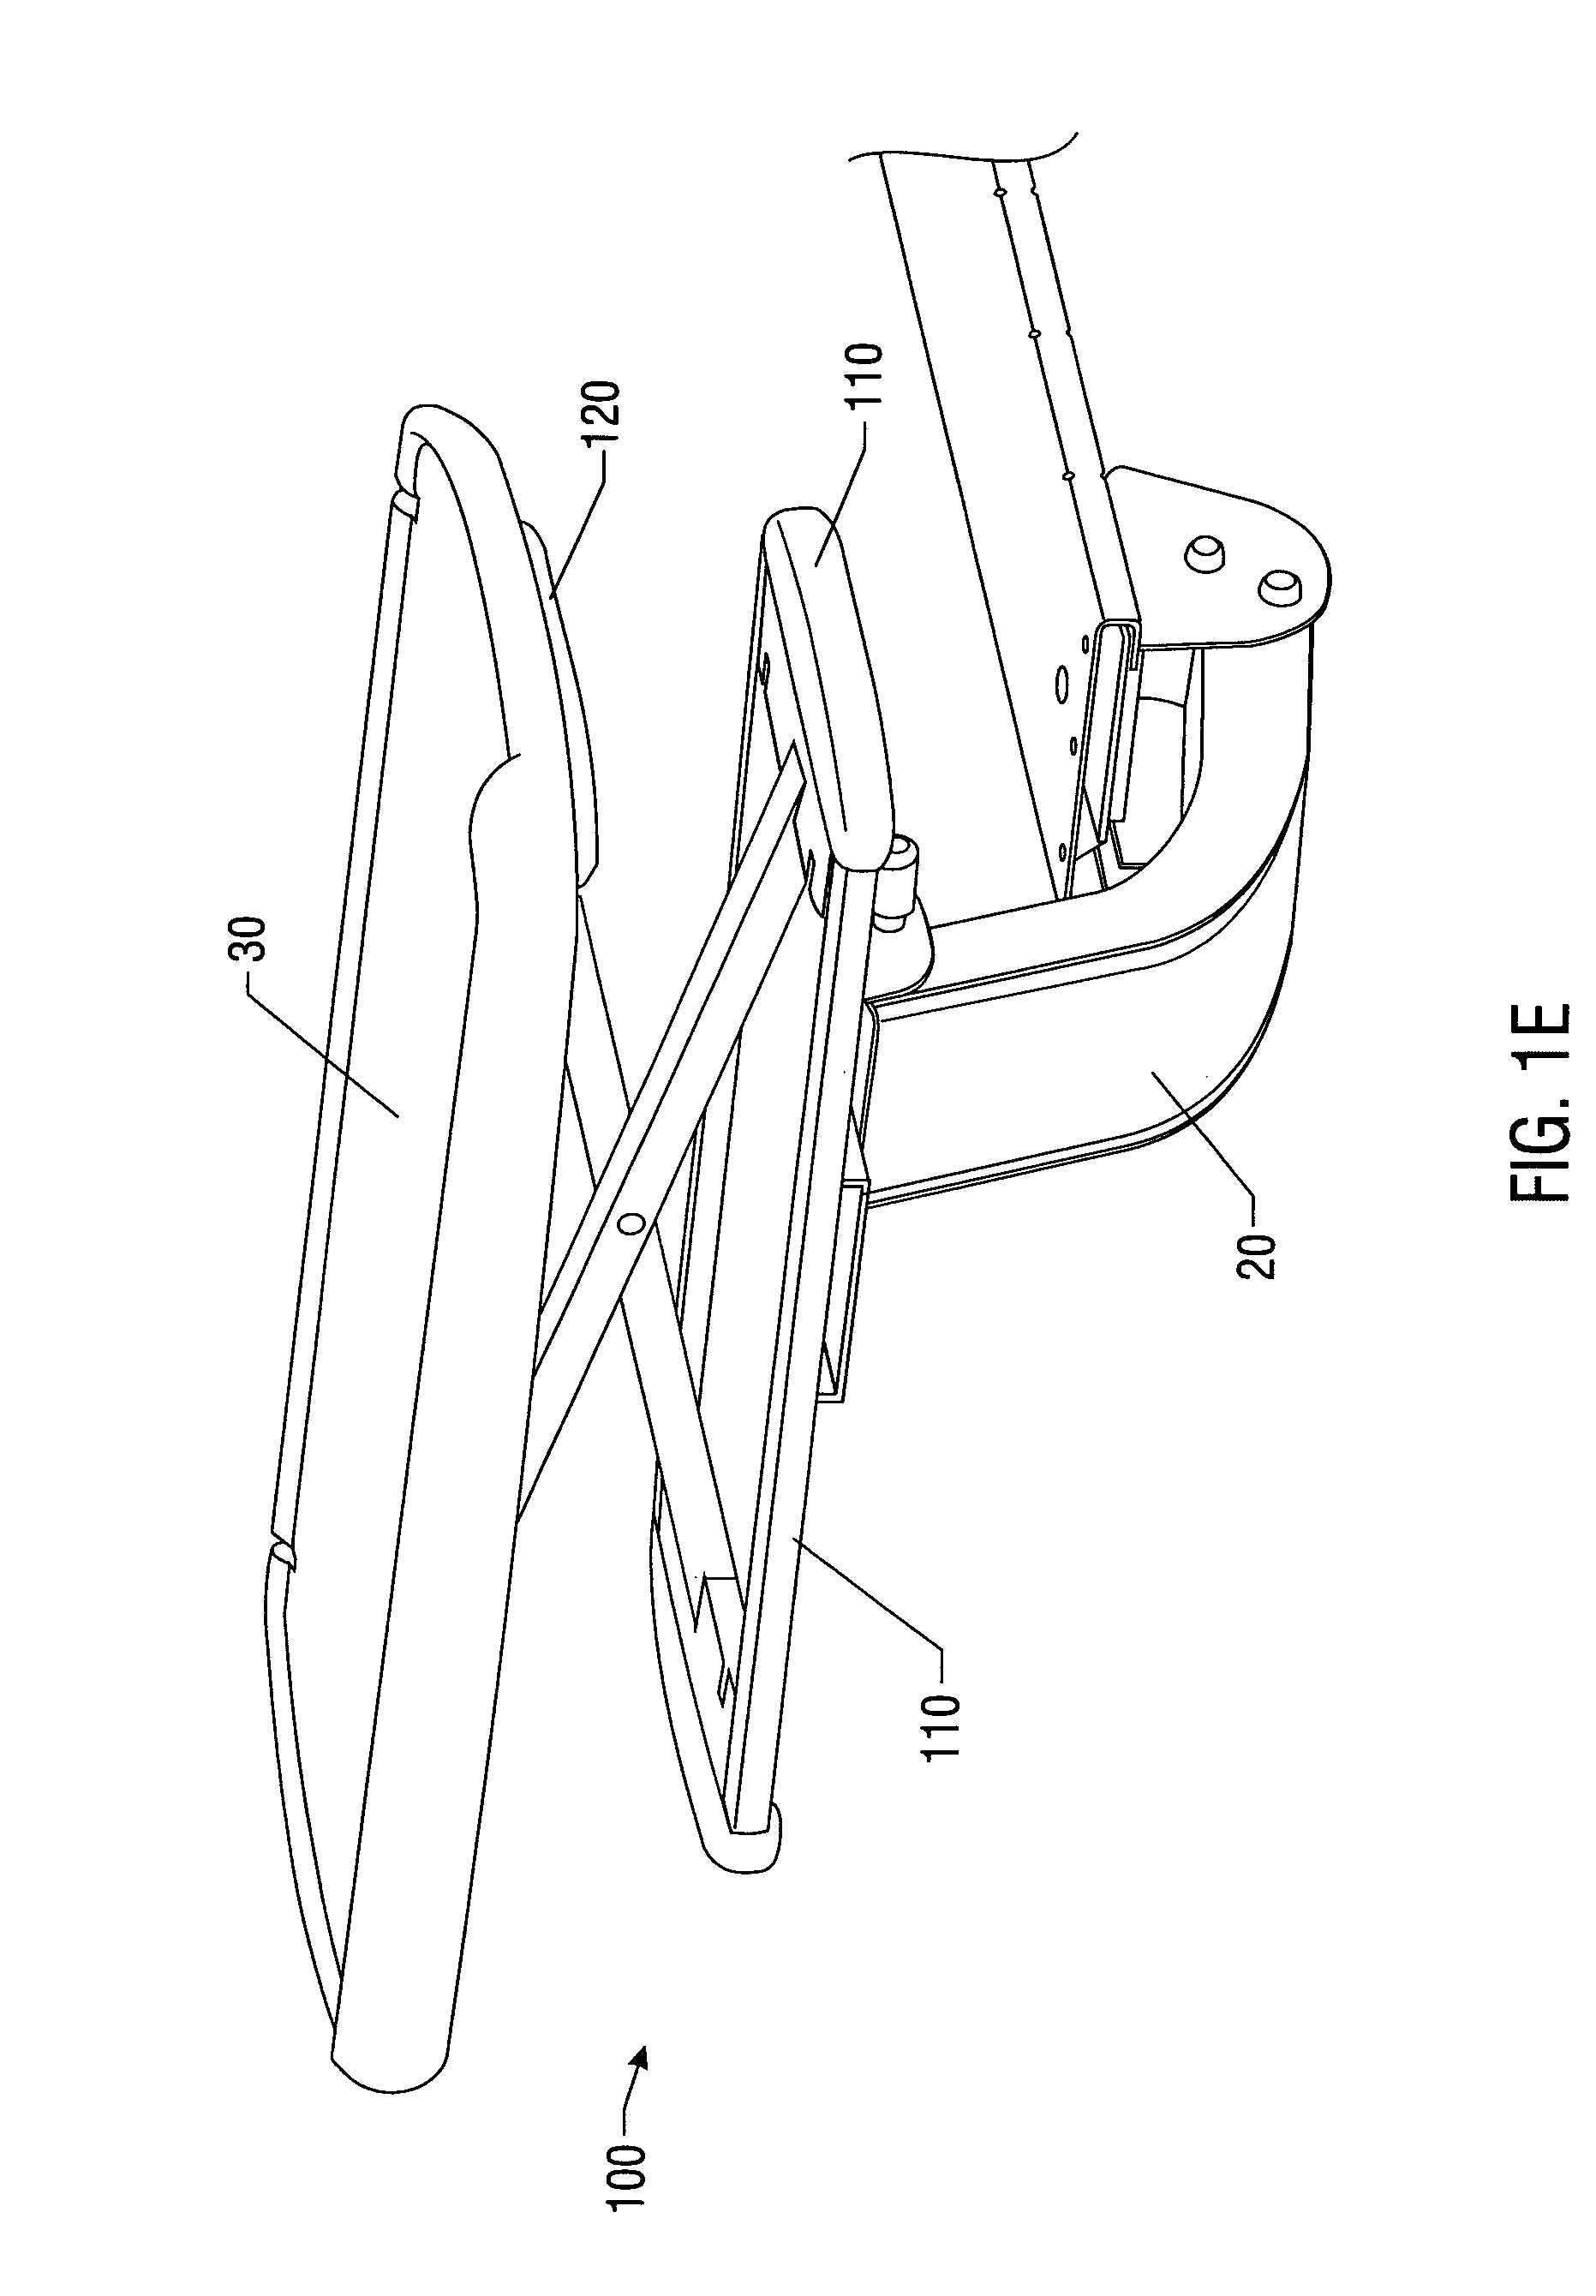 Vertical adjustment apparatus for a keyboard